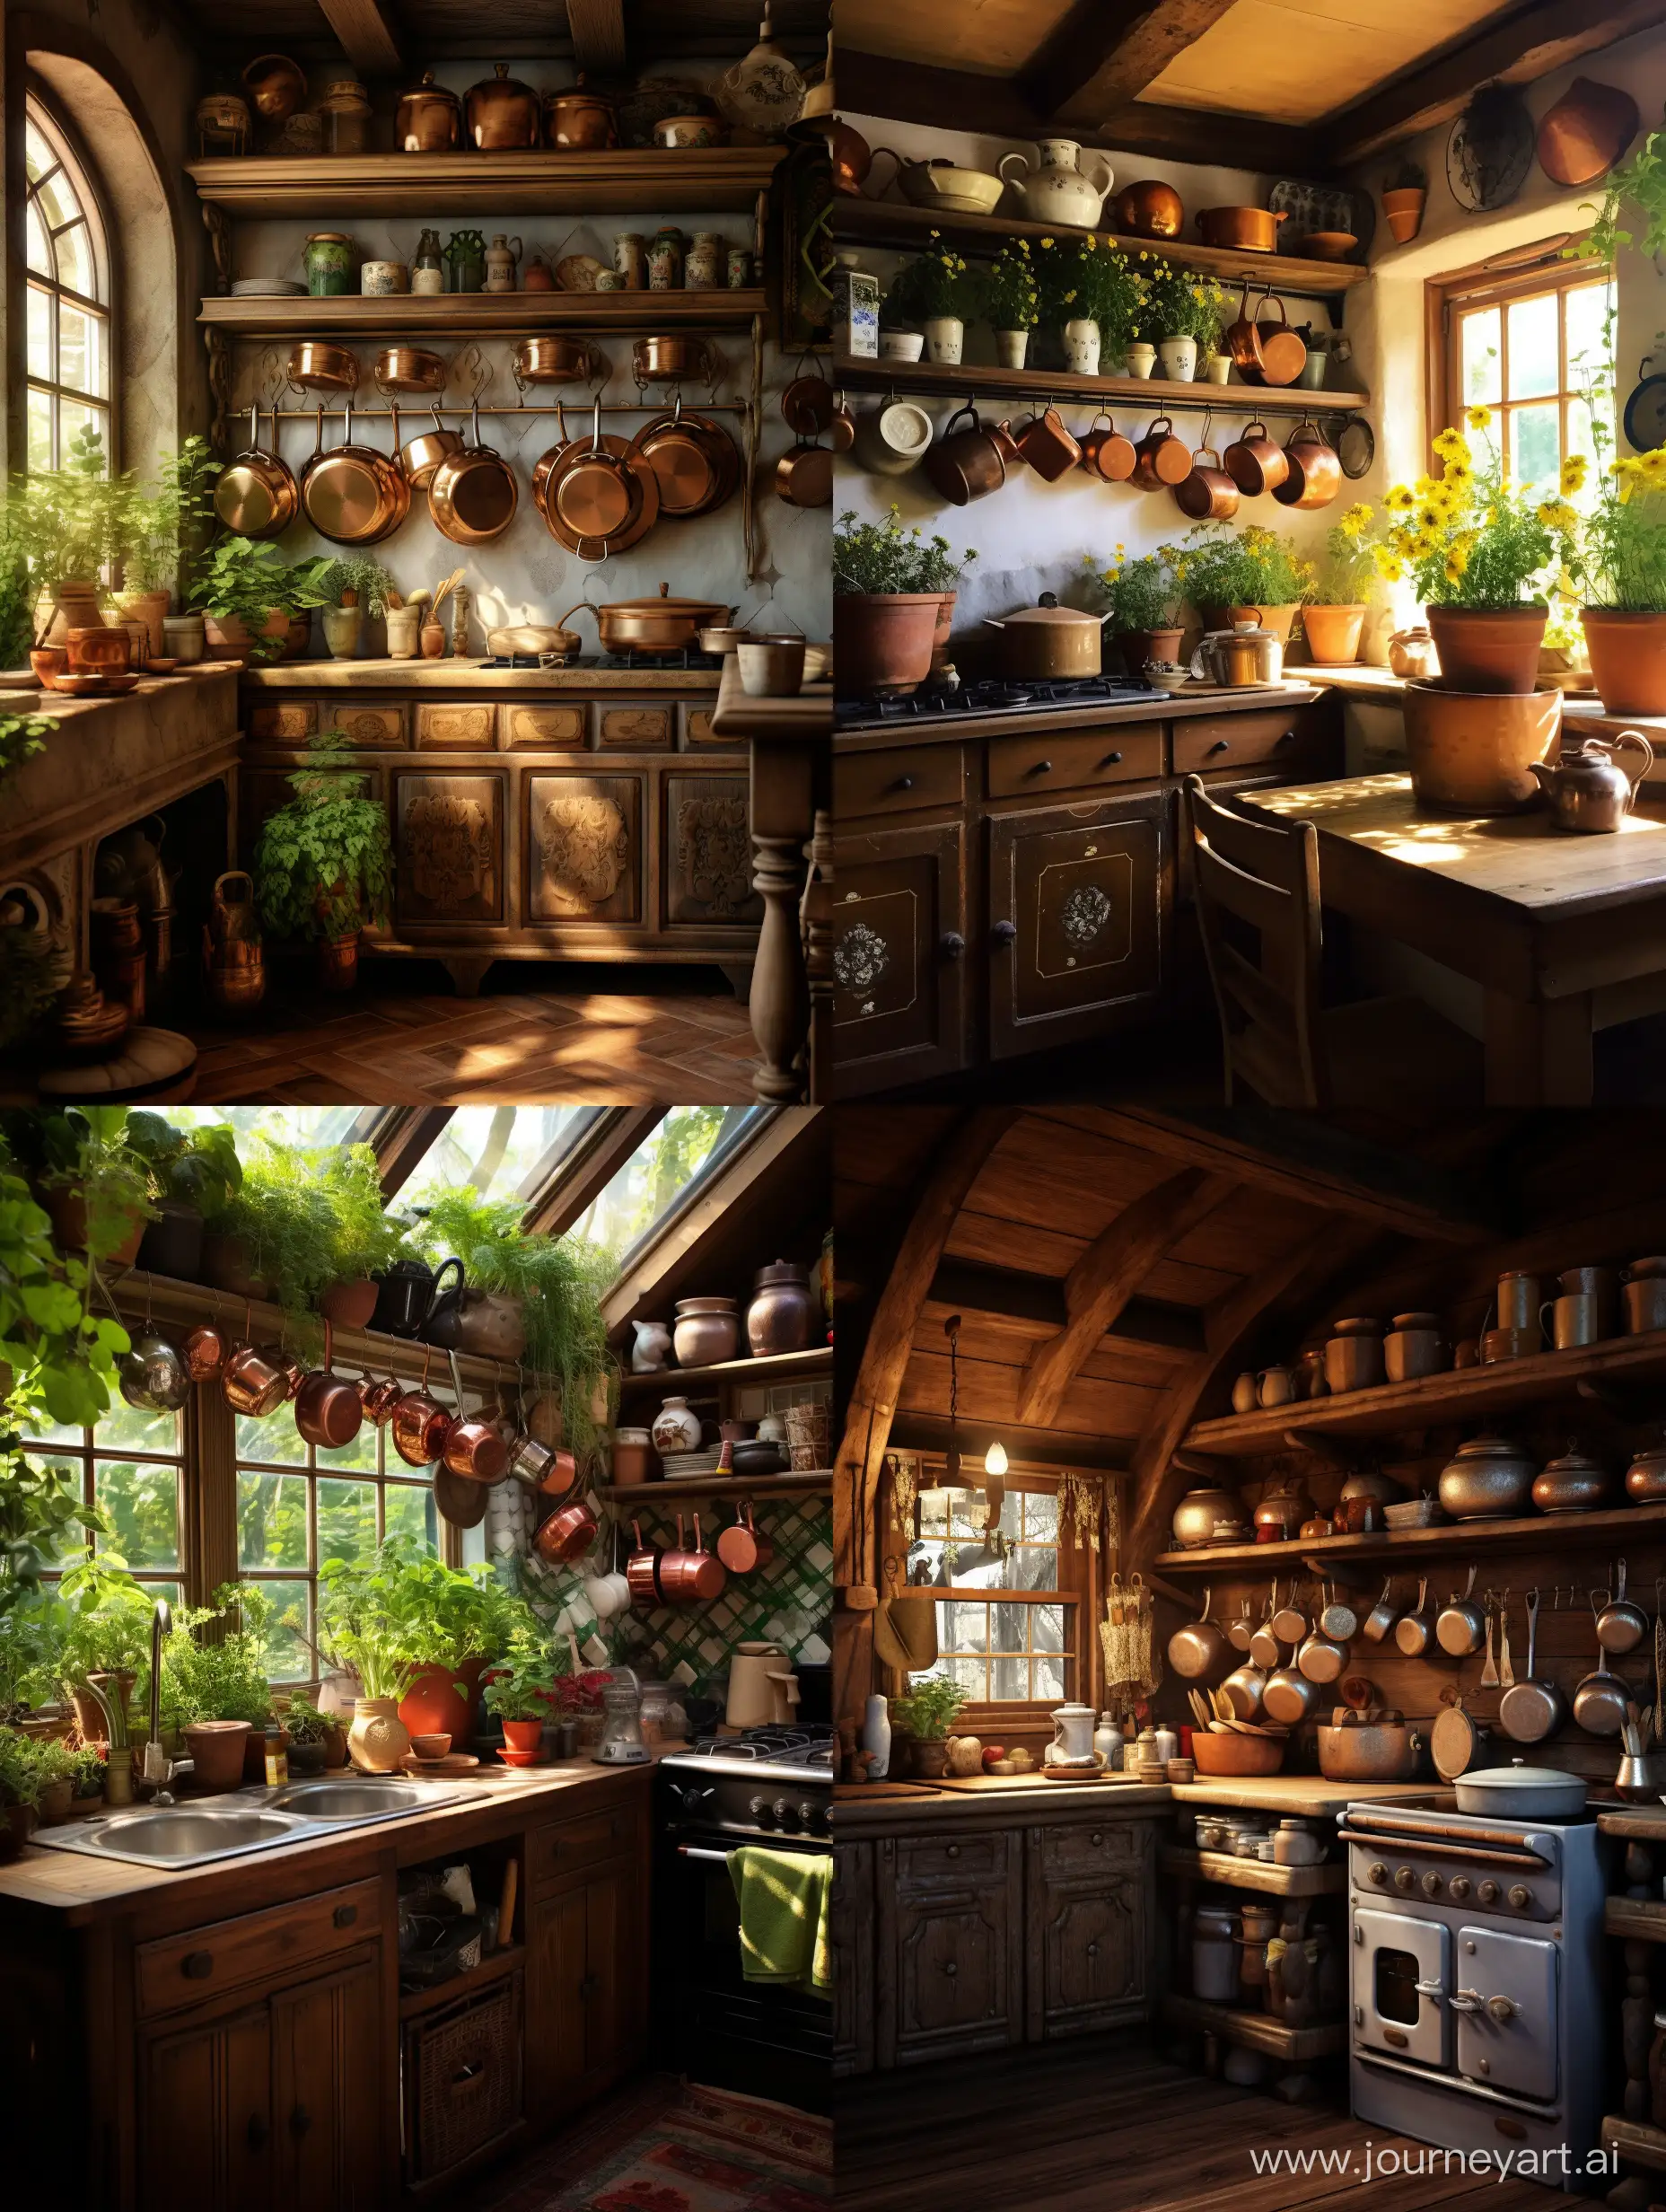 Warm-and-Cozy-Kitchen-with-Pots-Artistic-Scene-in-34-Aspect-Ratio